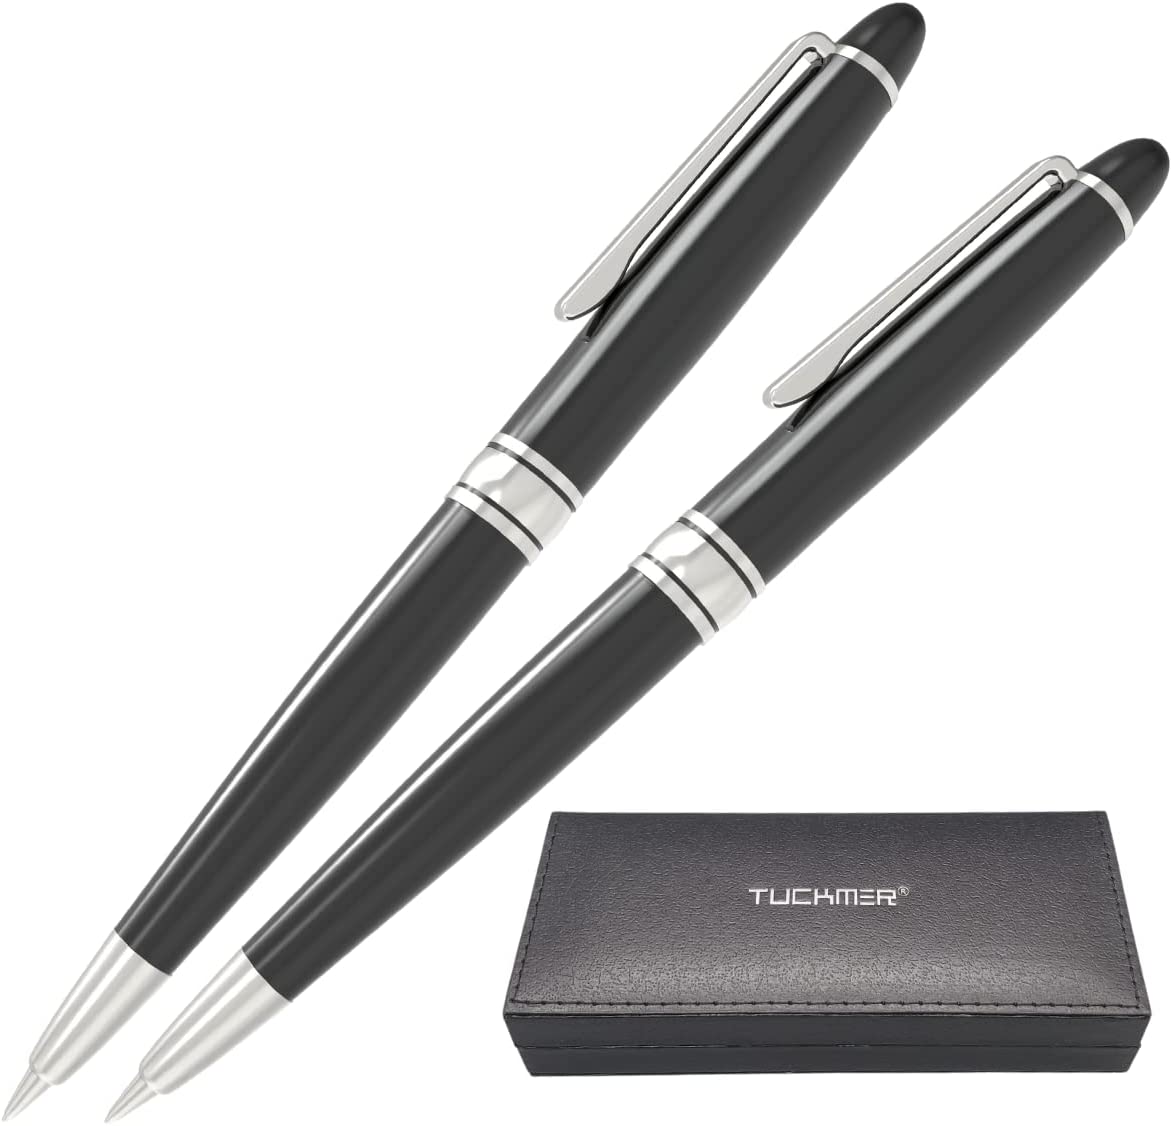 Nice Pens for Men and Women - Black color with Silver Trim - Set of 2 - Medium Point Metal Pen for Smooth Writing - Great Professional Business Gifts for Office Work Meetings